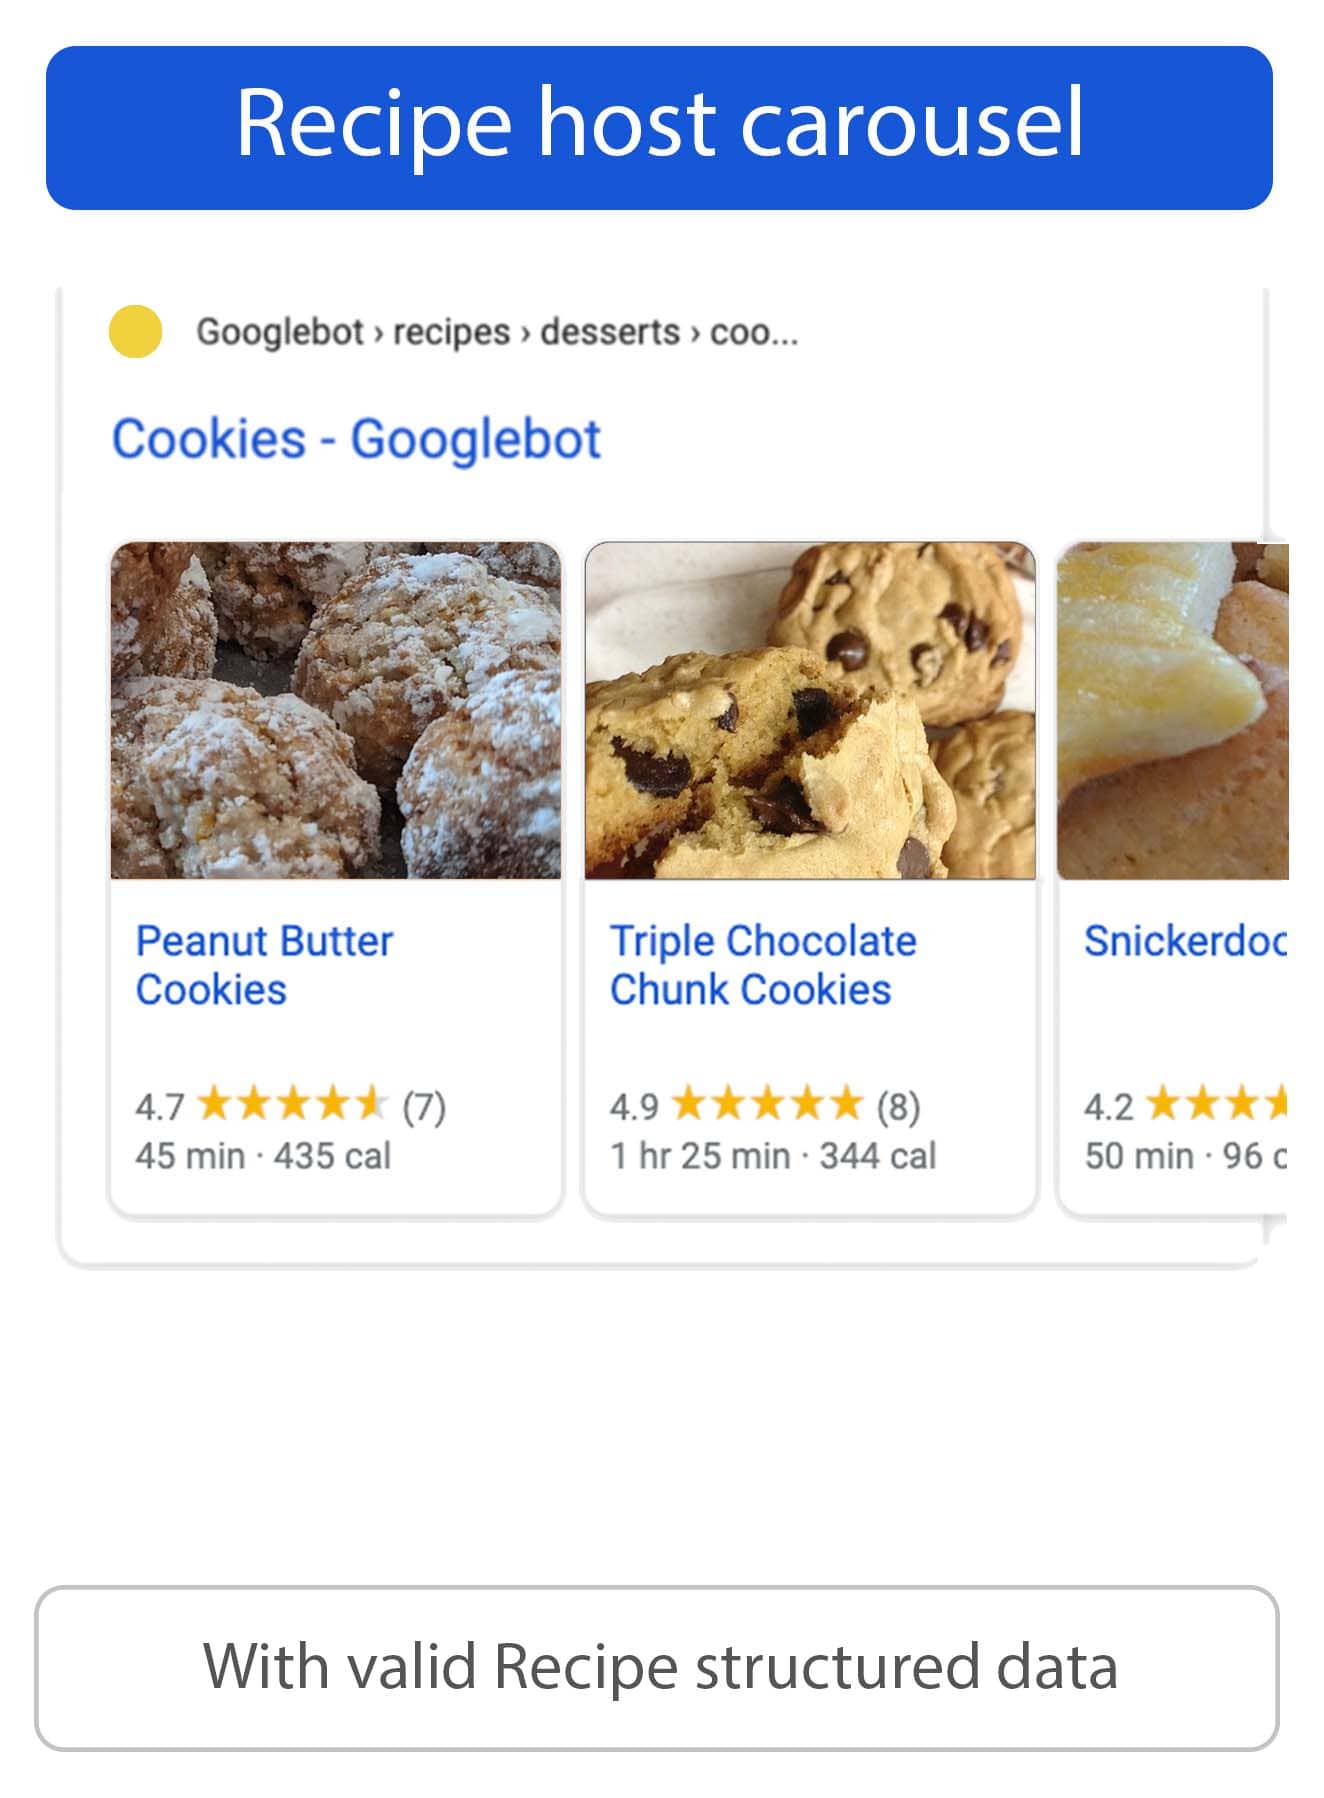 Example of Recipe host carousel in Google Search Results